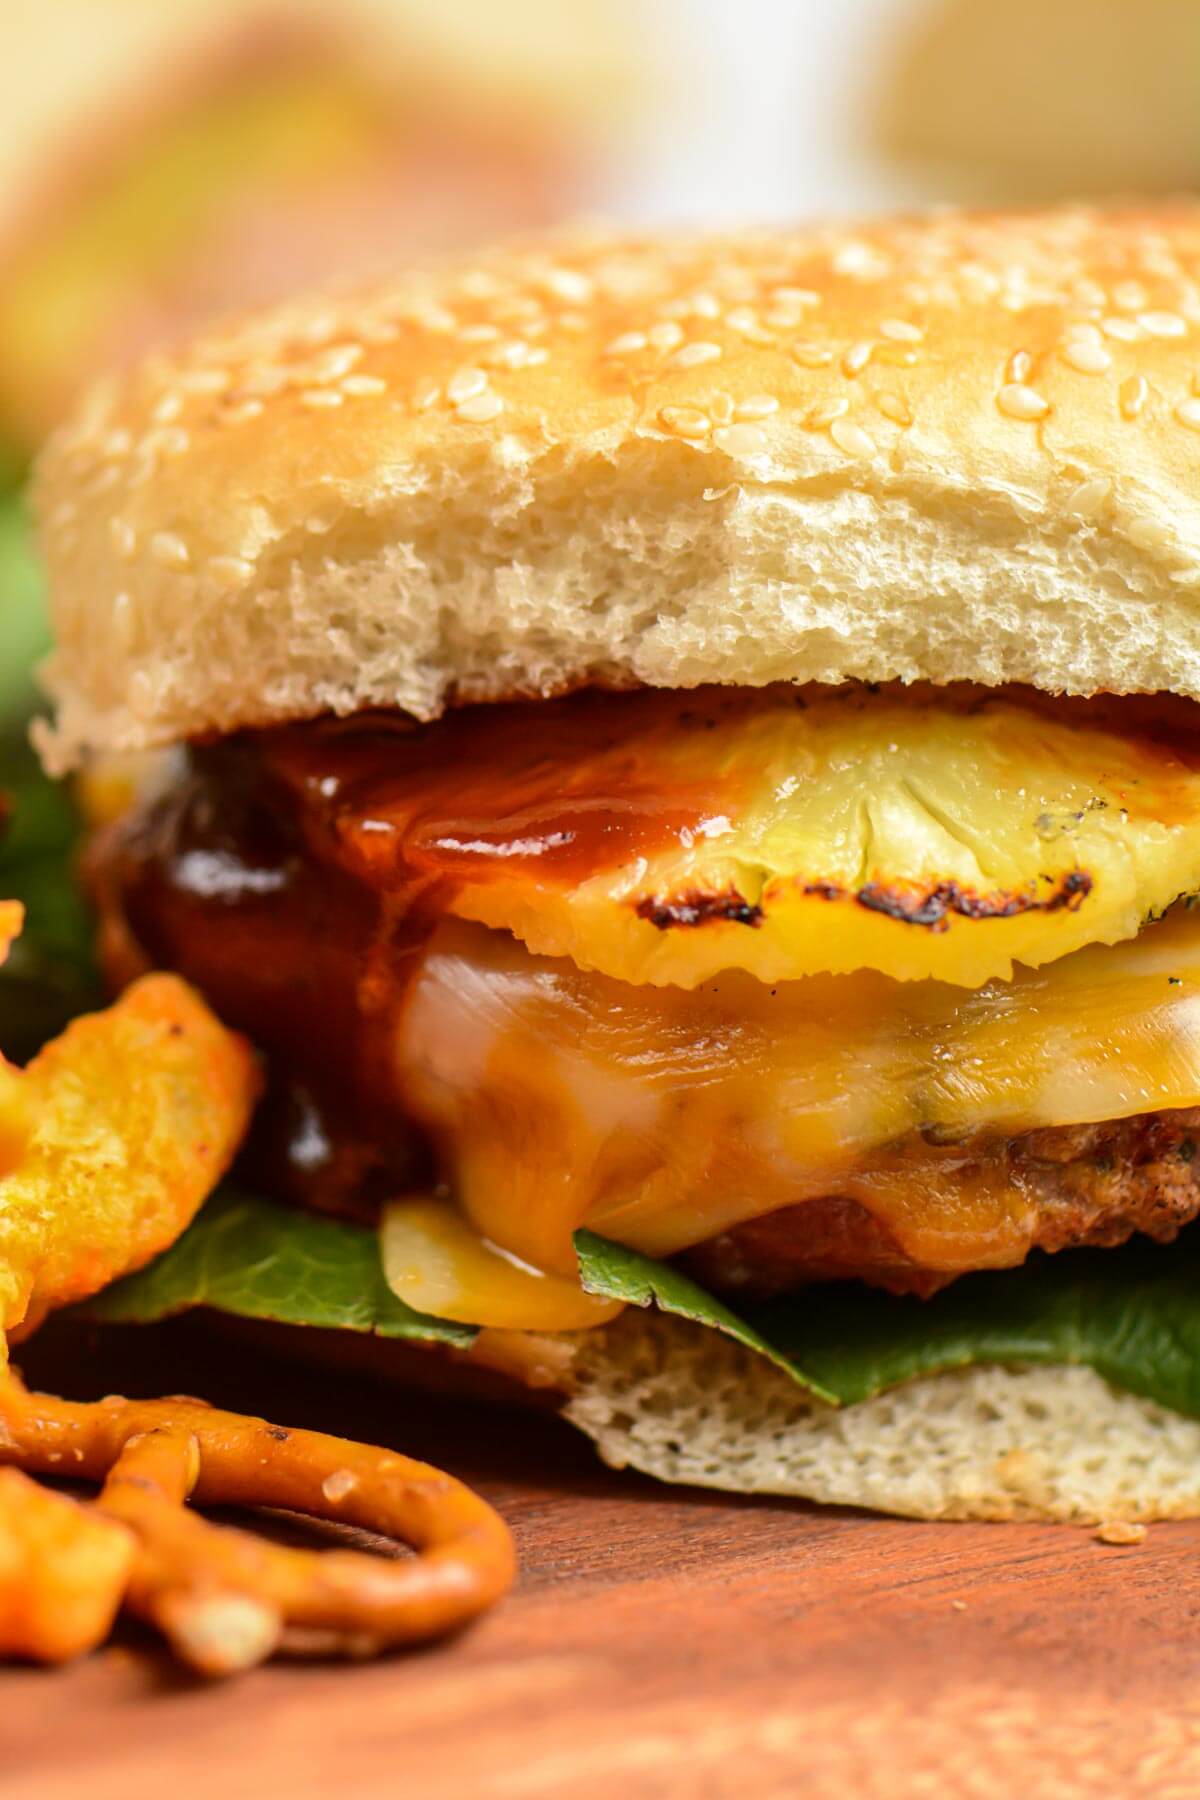 front view of the grilled turkey burger with pineapple, cheese and BBQ sauce showing.